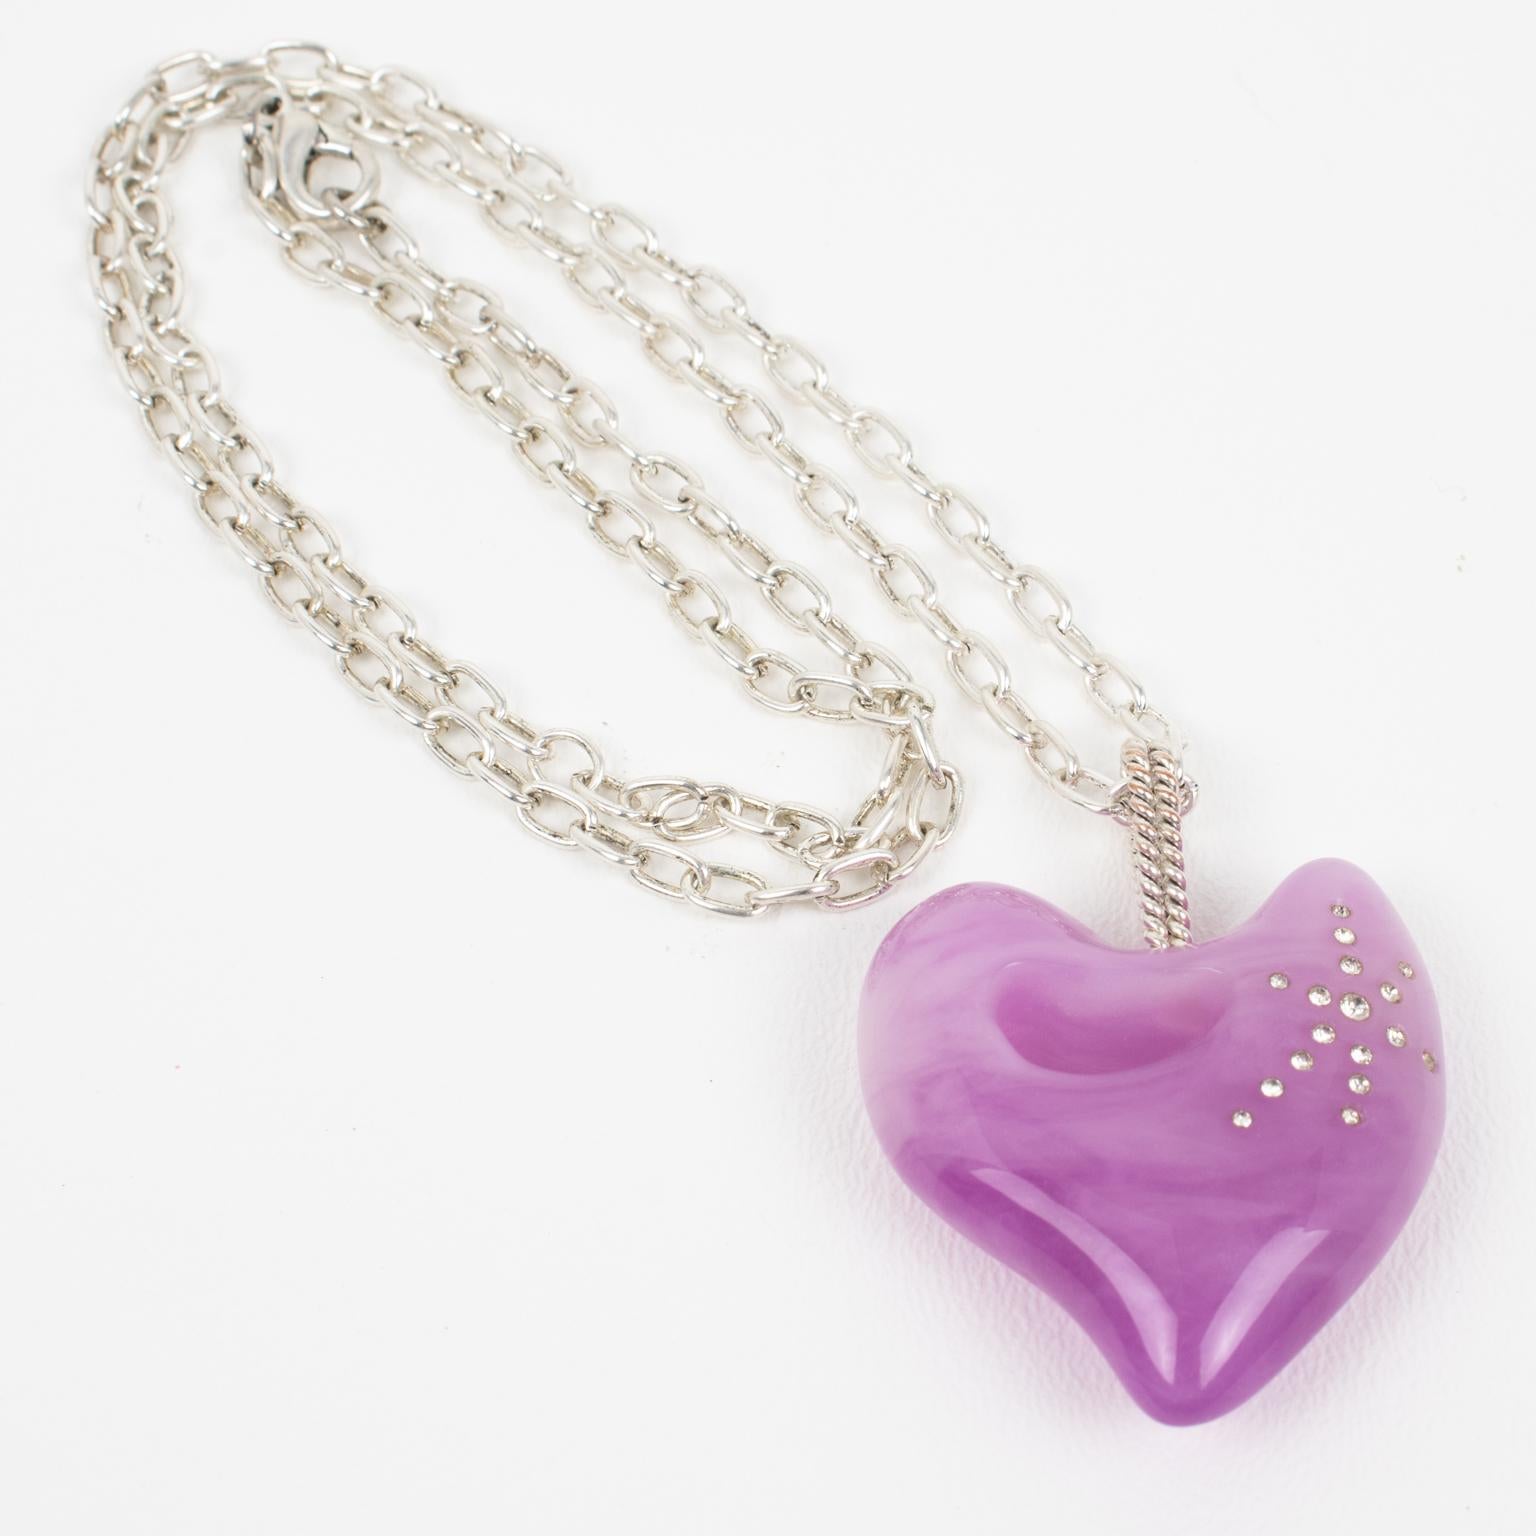 Christian Lacroix Silver Plate Chain Necklace with Purple Lavender Resin Heart For Sale 5